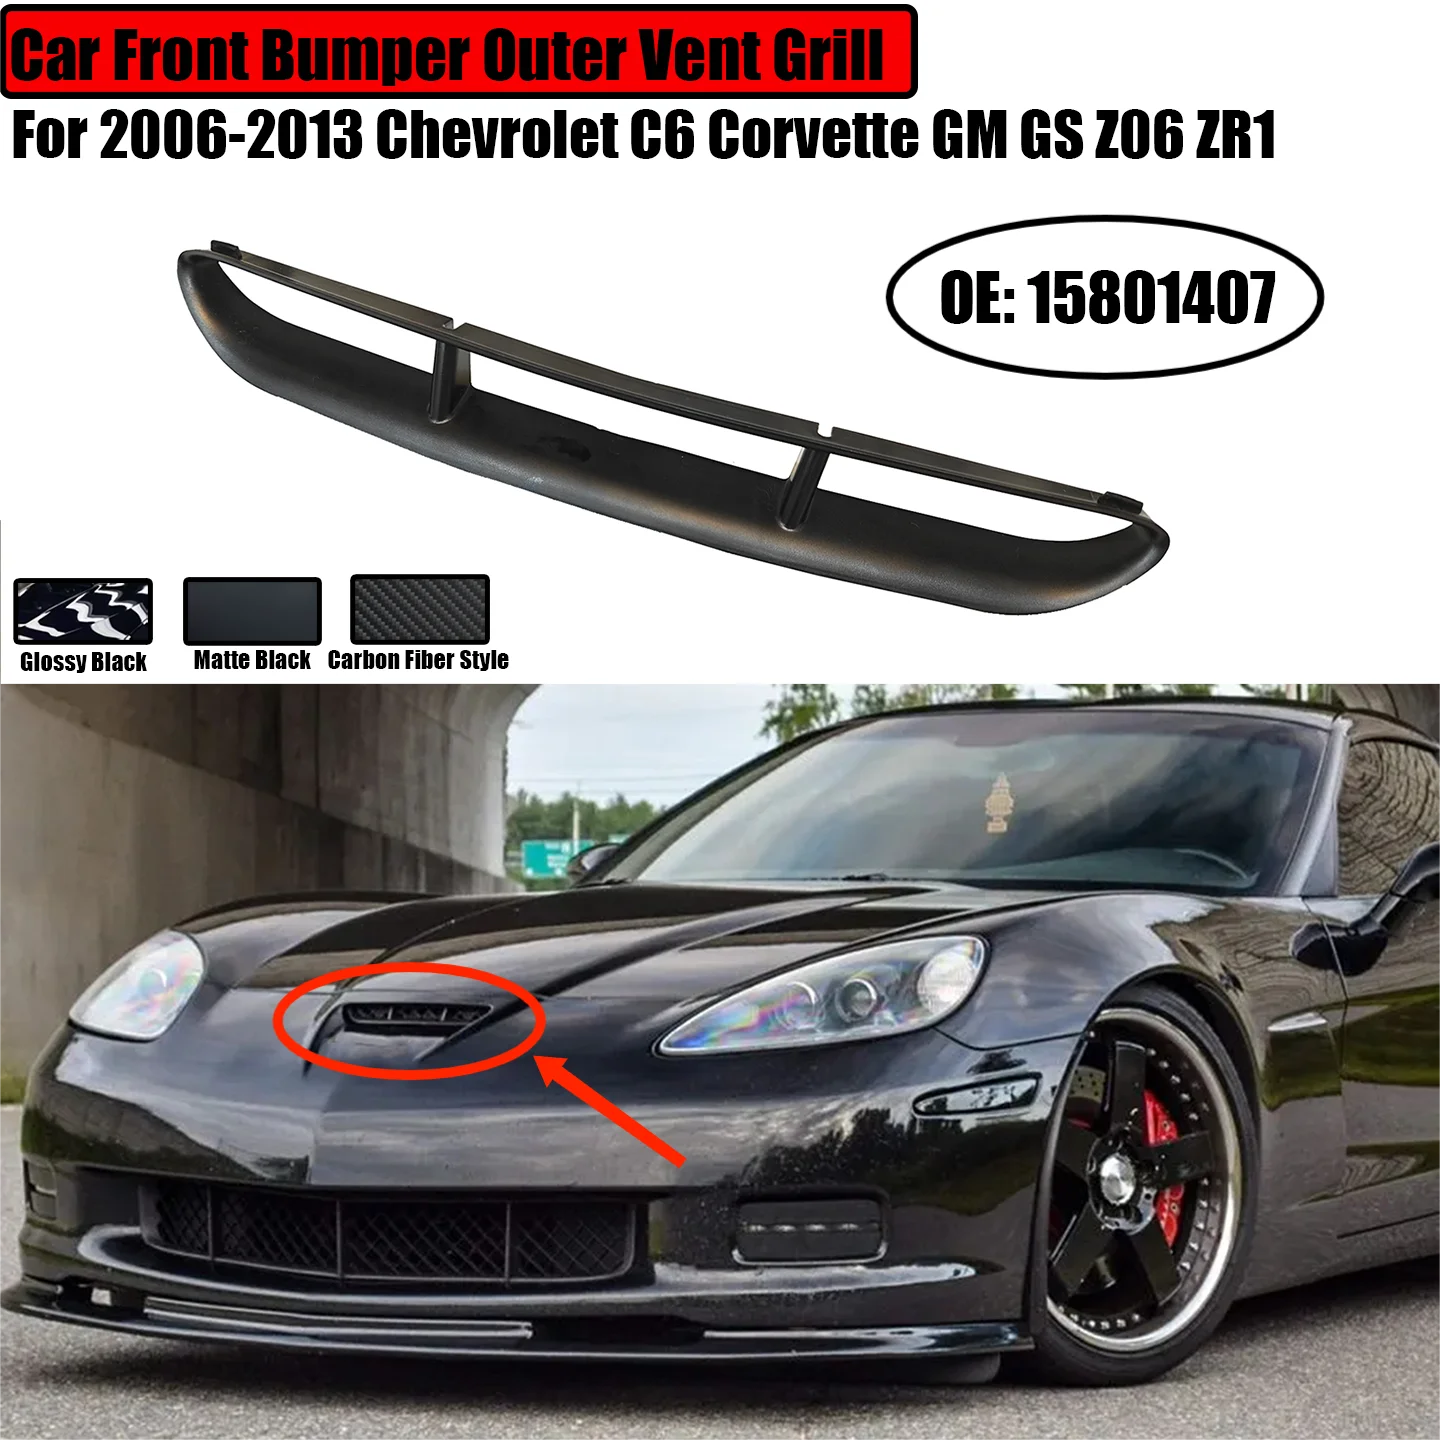 

Car Front Bumper Outer Vent Grill For 2006-2013 Chevrolet C6 Corvette GM GS Z06 ZR1 Upper Grille Body Kit Replacement 15801407